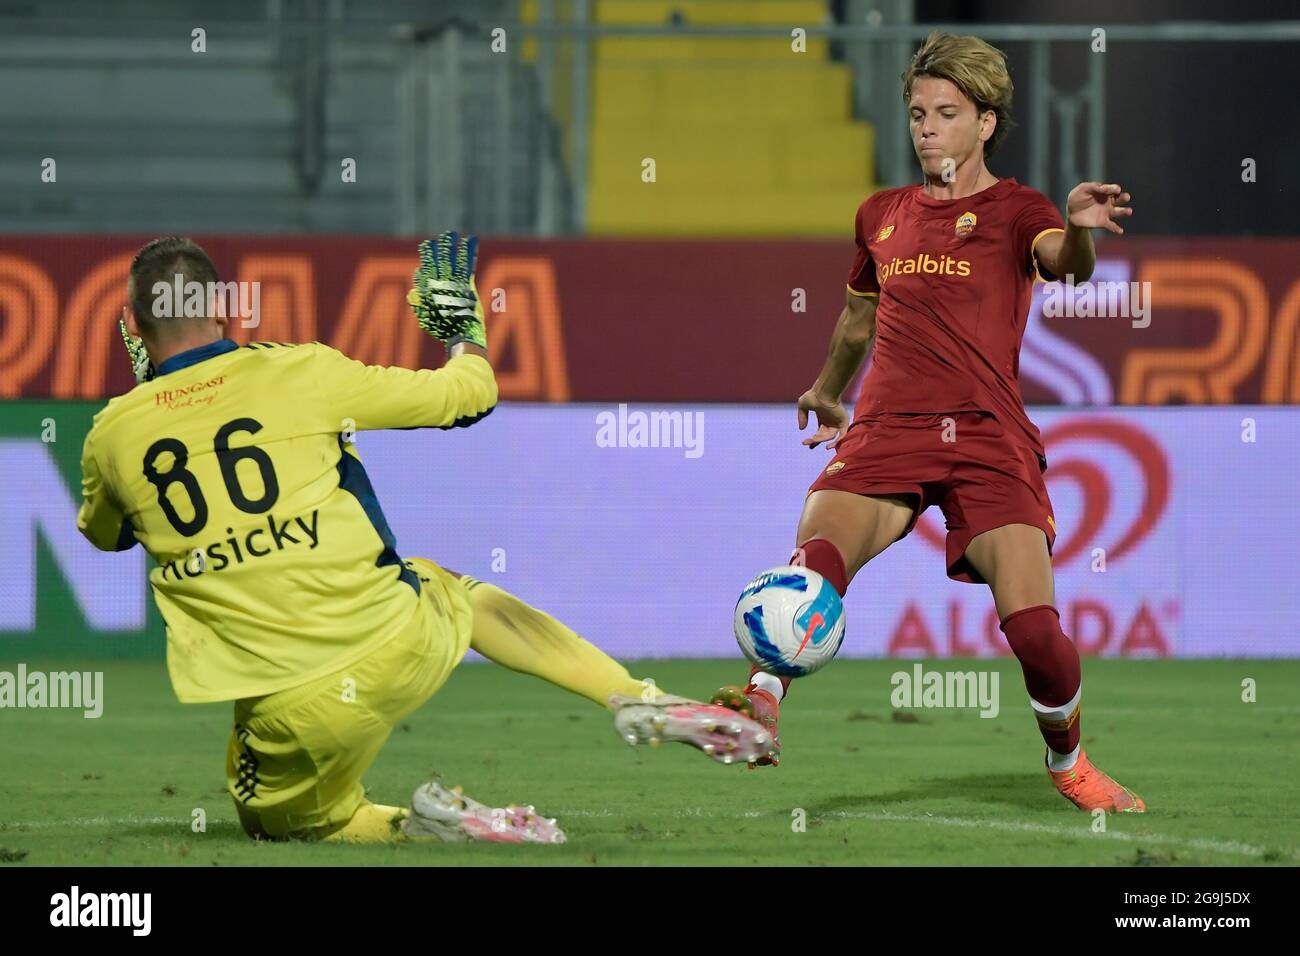 Frosinone, Italy. 25th July, 2021. Riccardo Ciervo of AS Roma, clhallenged by Tomas Kosicky of Debrecen, in action during the pre season friendly football match between AS Roma and Debrecen at Benito Stirpe stadium in Frosinone (Italy), July 25th, 2021. Photo Andrea Staccioli/Insidefoto Credit: insidefoto srl/Alamy Live News Stock Photo